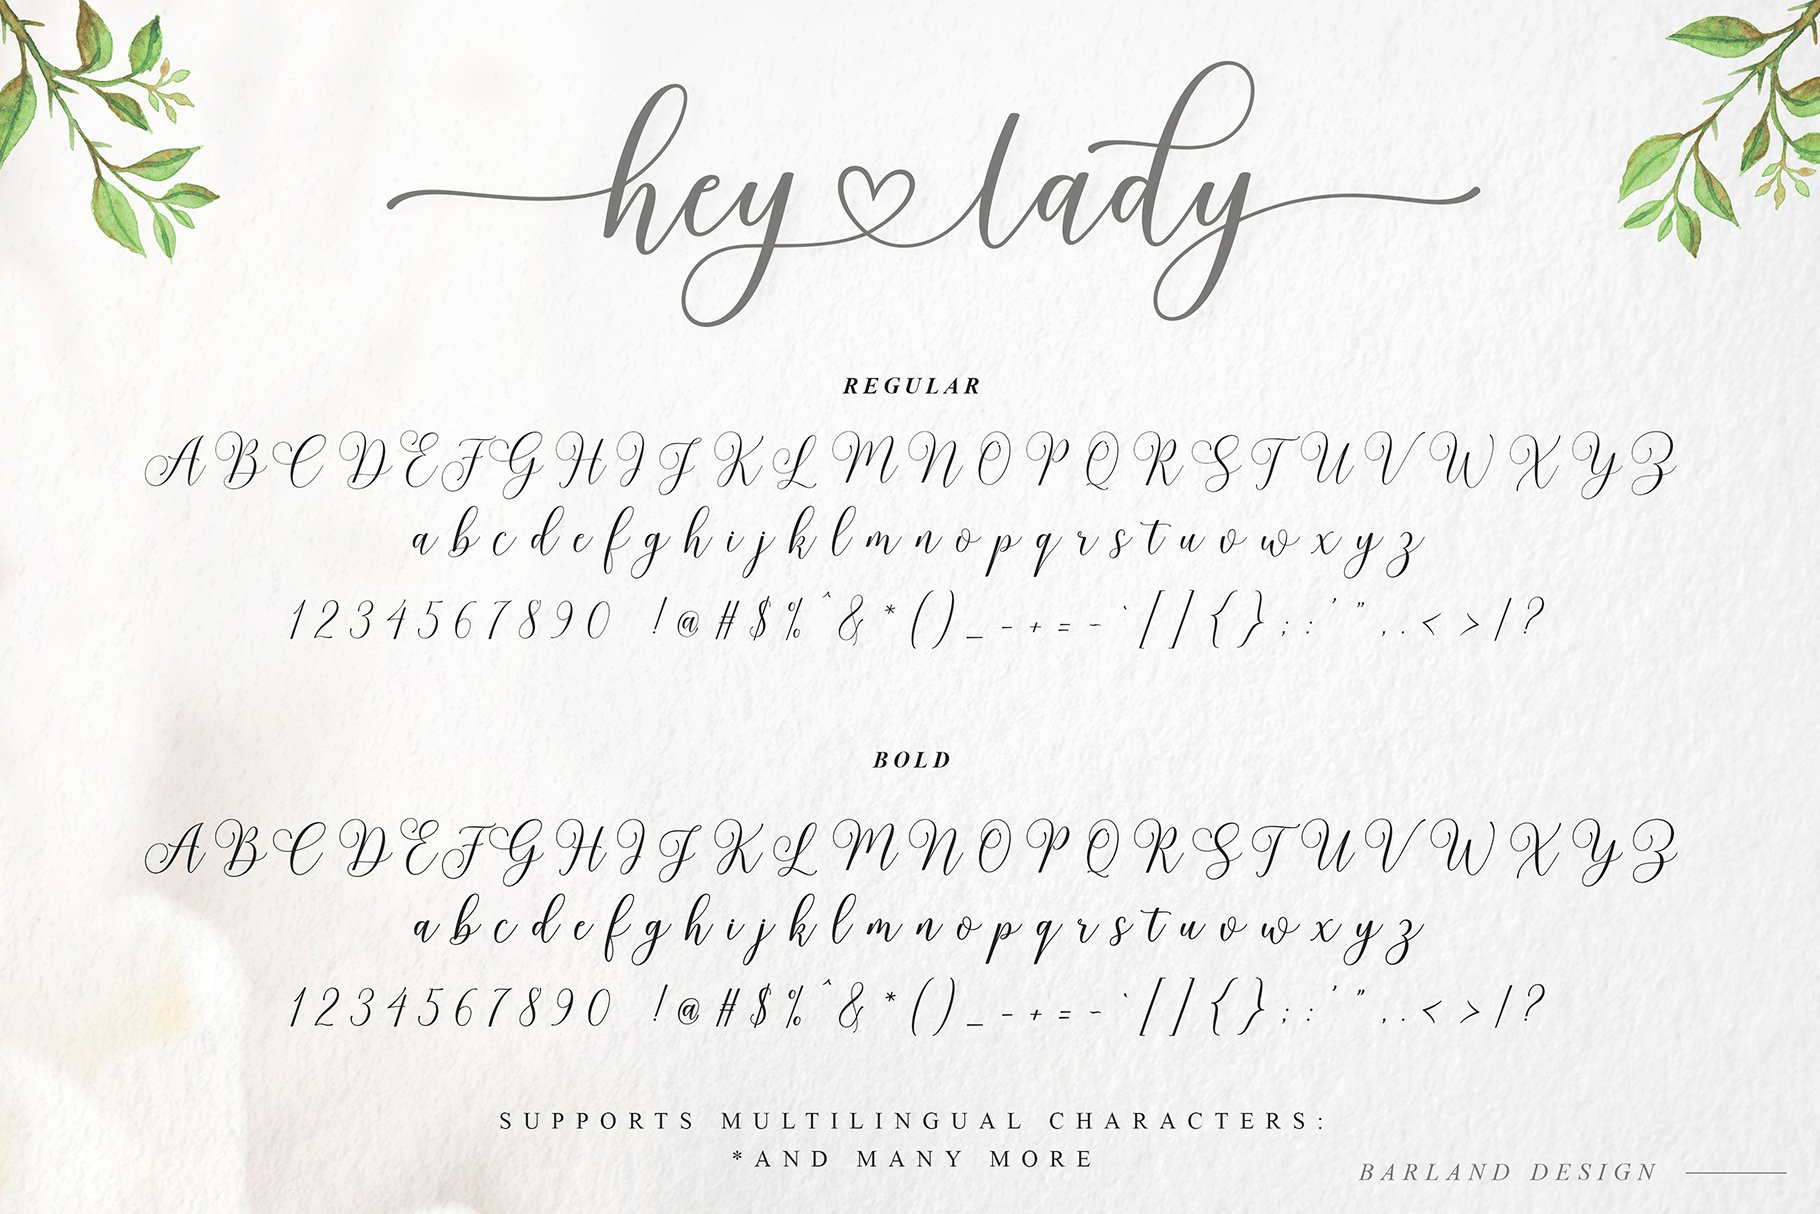 The main features of Hey lady font.